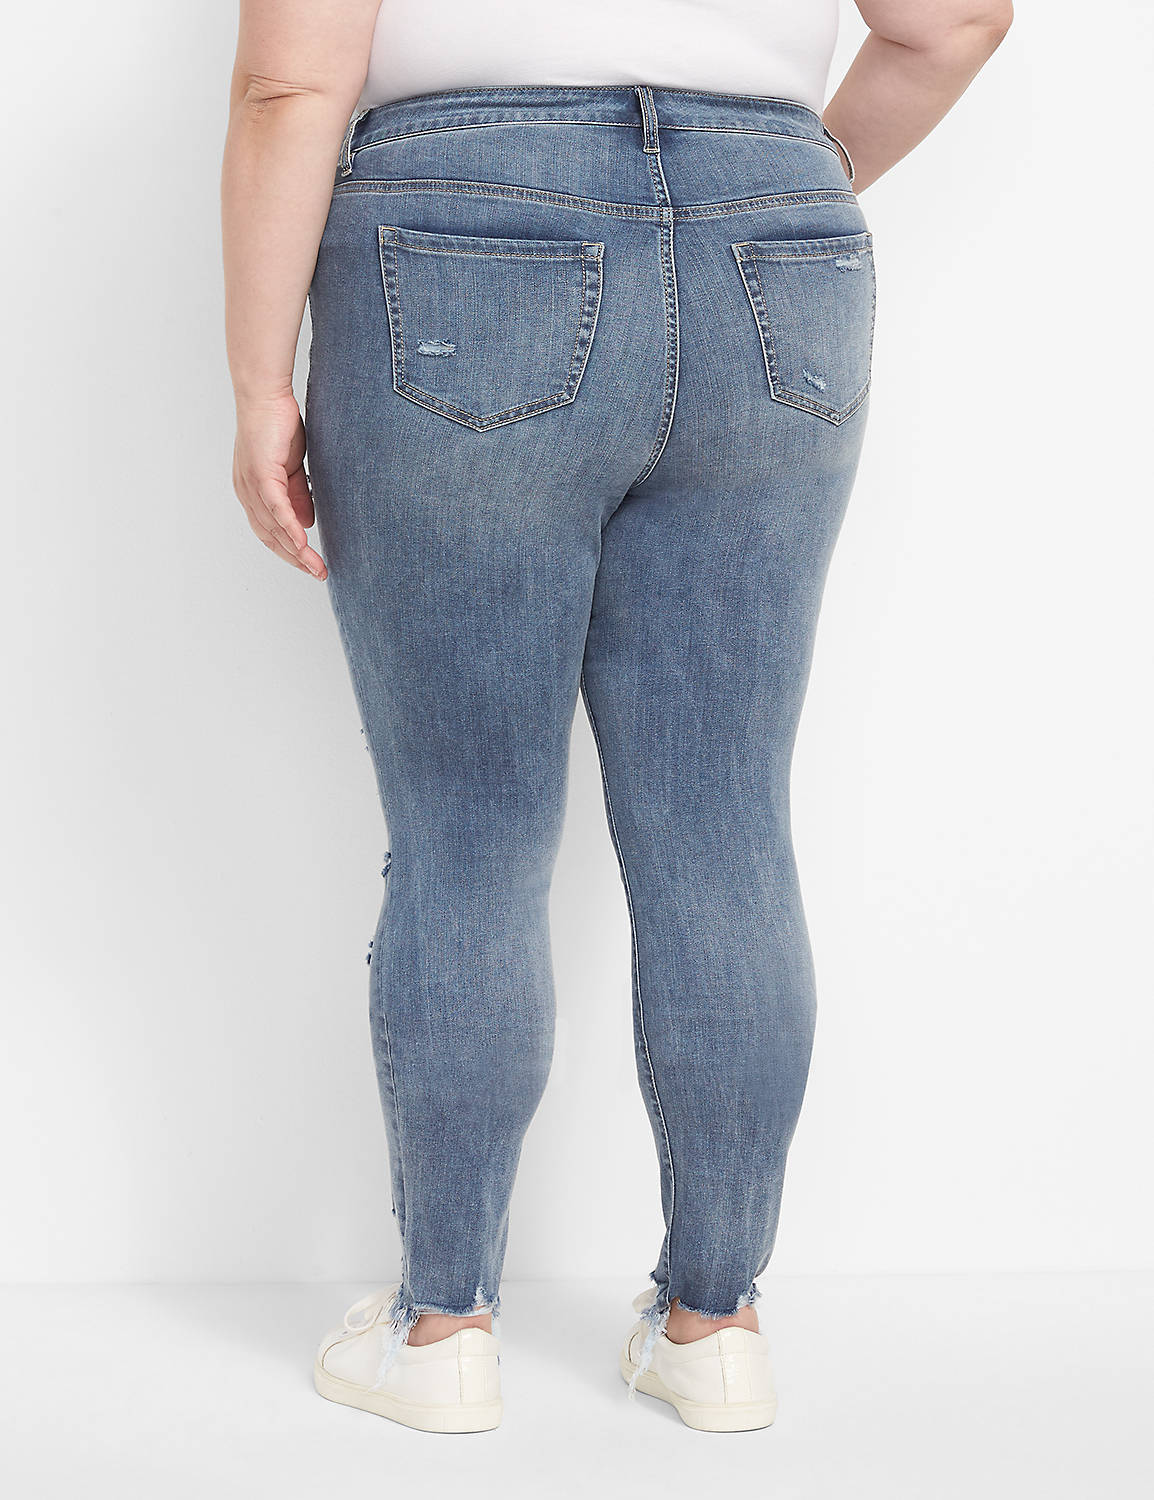 STRAIGHT FIT HIGH RISE SKINNY- DIAN Product Image 2